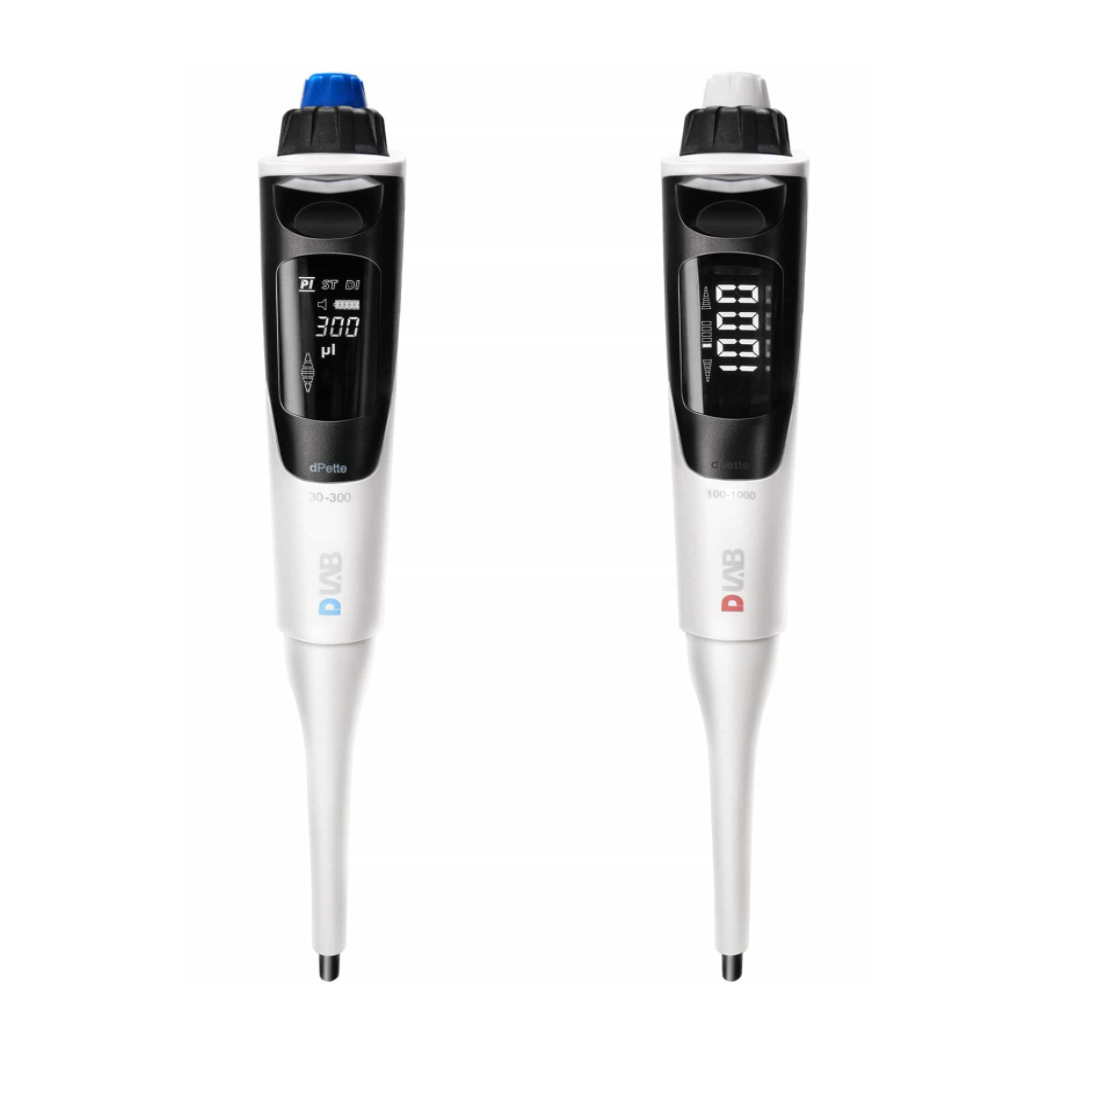 D-Lab™ dPette+, Multifunction Electronic pipettes, Single-channel Adjustable Volume, 100 - 1000 μl